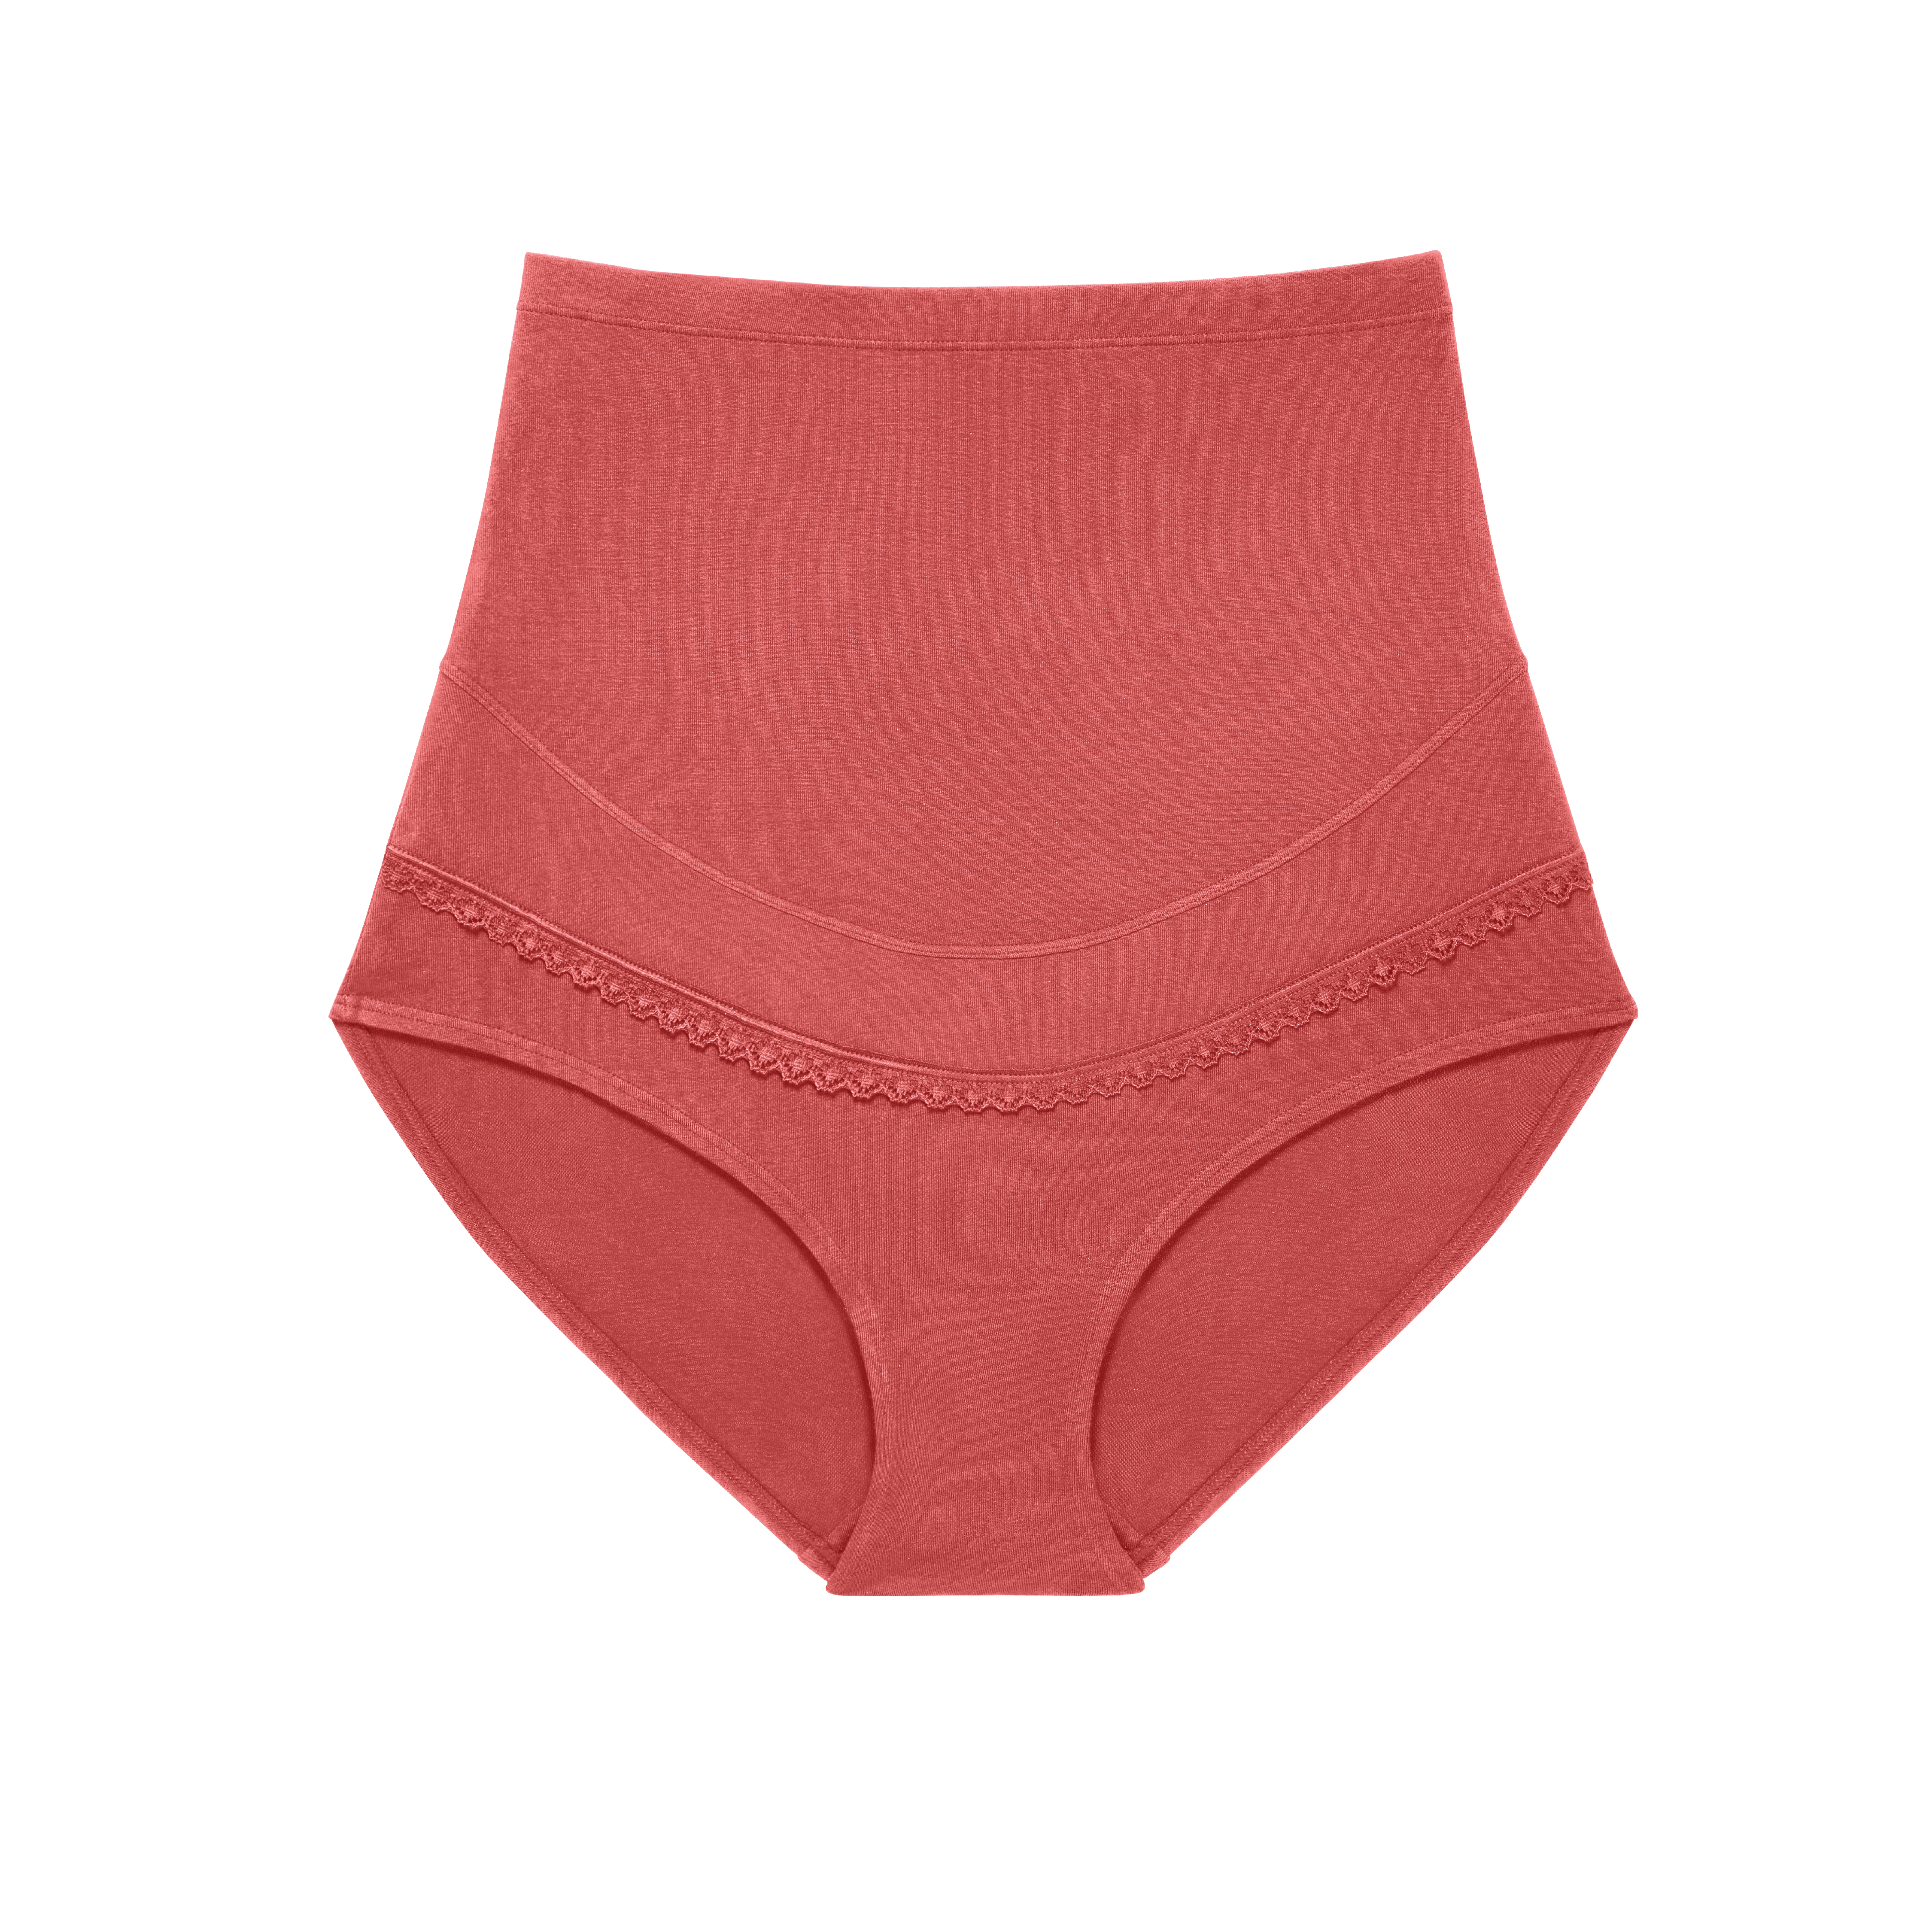 Preggy Panty - Pack of 2